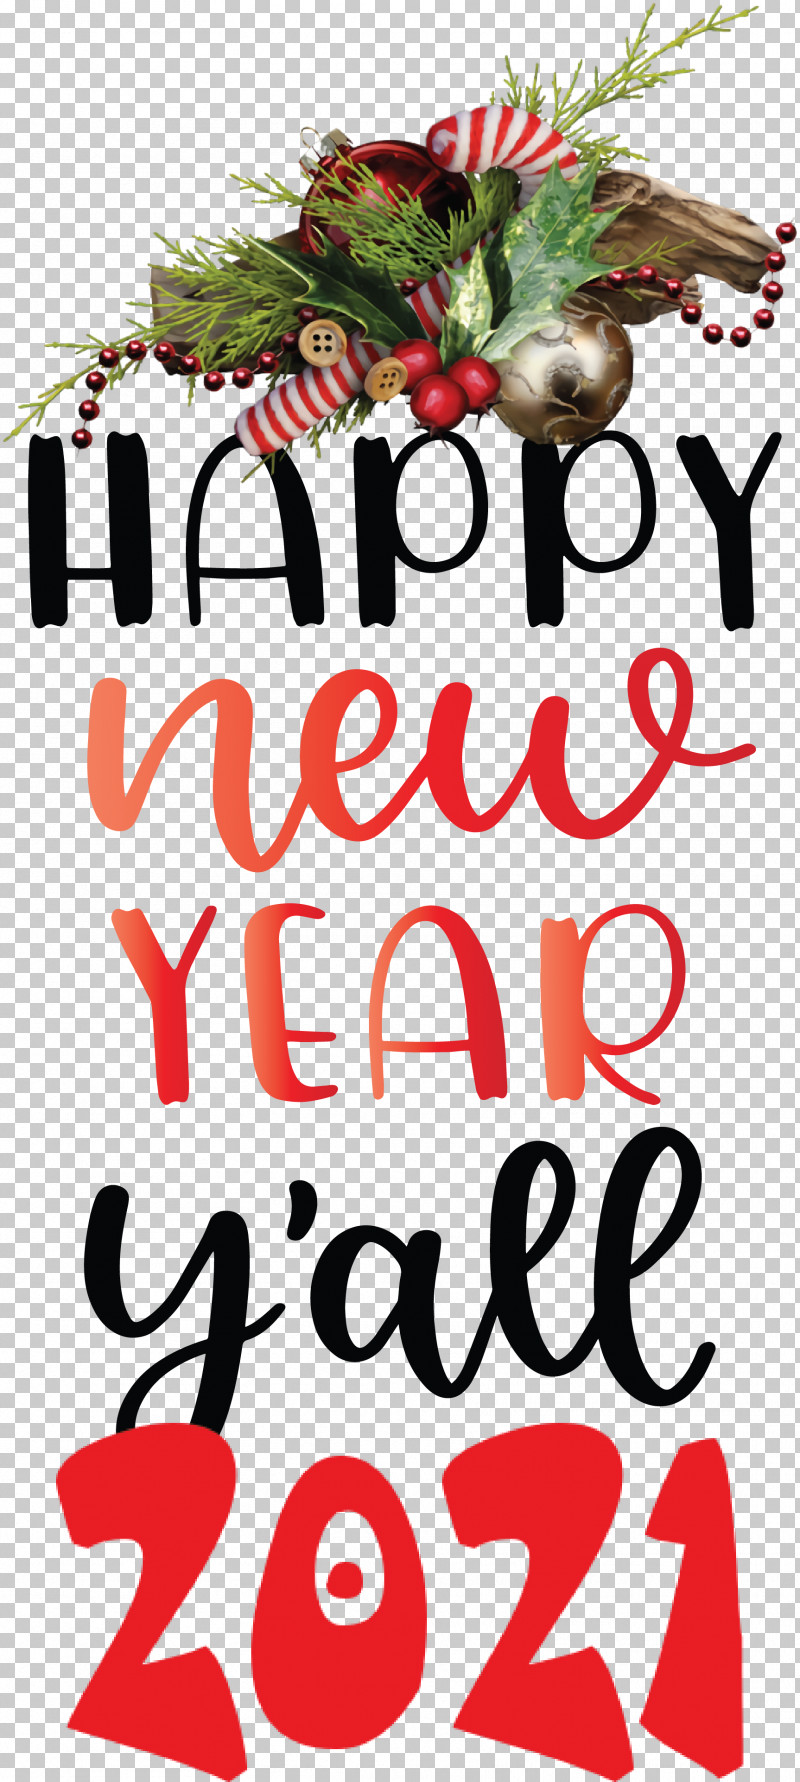 2021 Happy New Year 2021 New Year 2021 Wishes PNG, Clipart, 2021 Happy New Year, 2021 New Year, 2021 Wishes, Birthday, New Year Free PNG Download